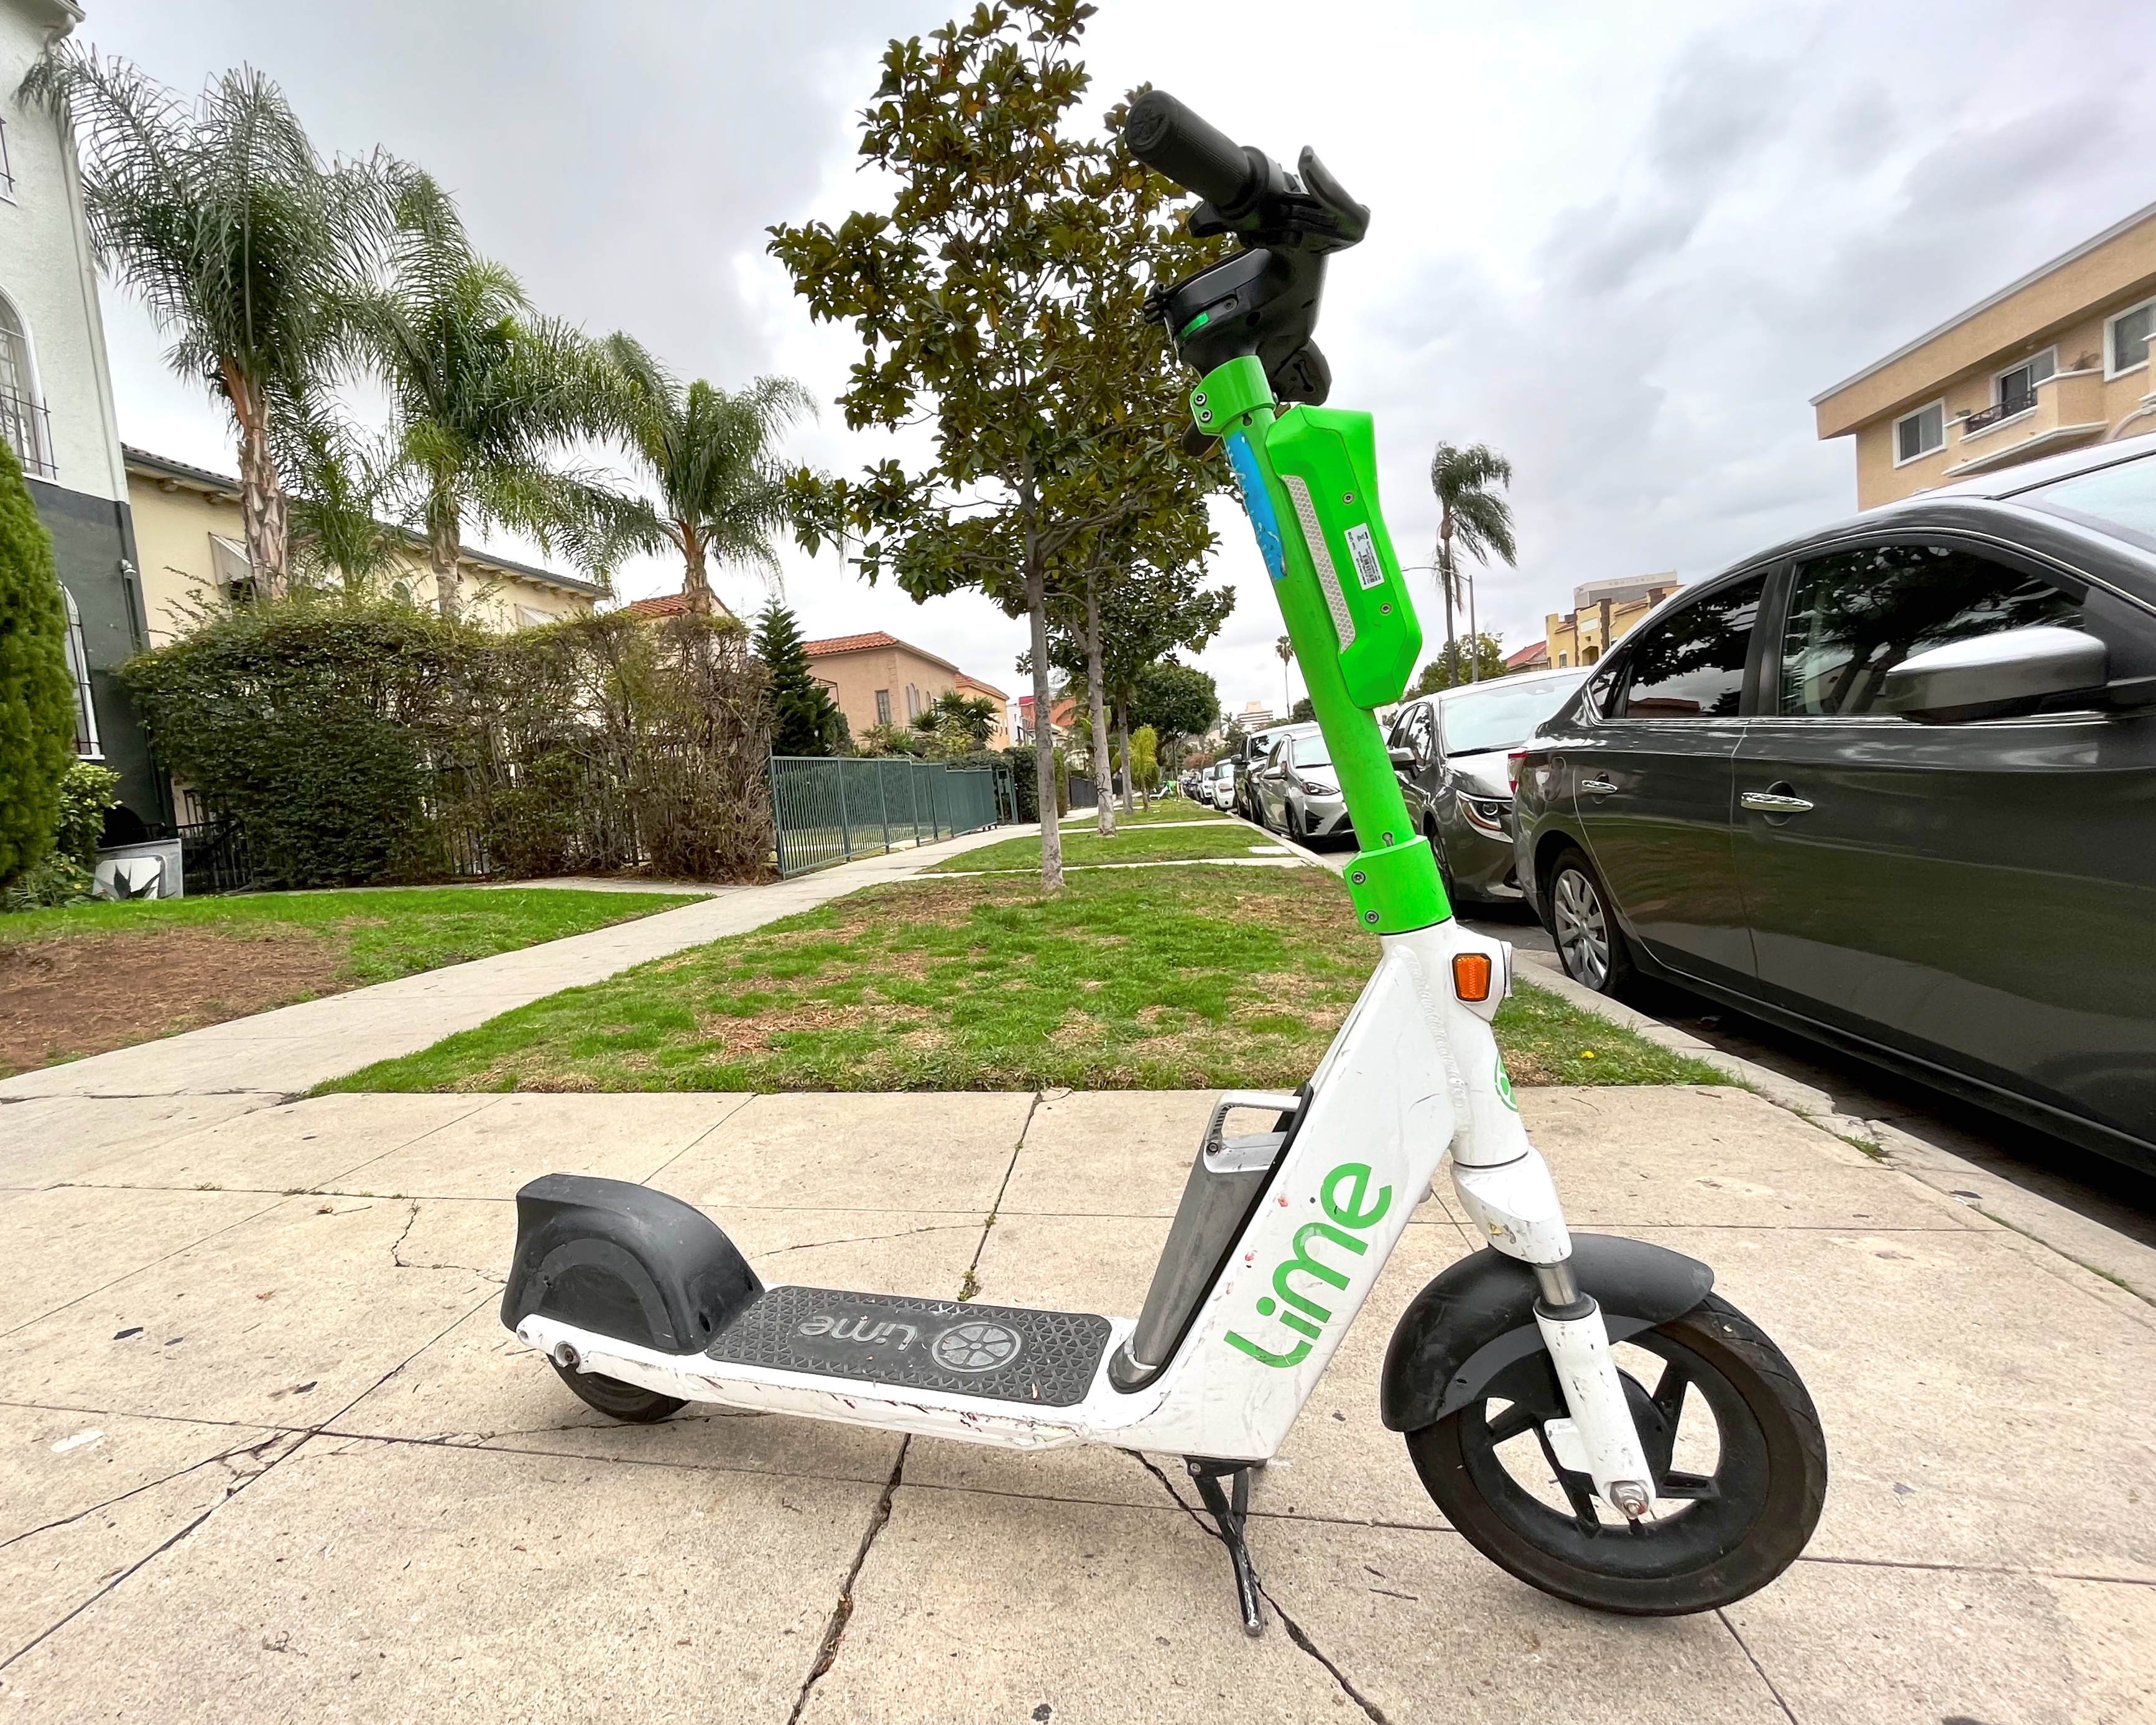 A shared scooter was parked on a sidewalk, Koreatown, Los Angeles.